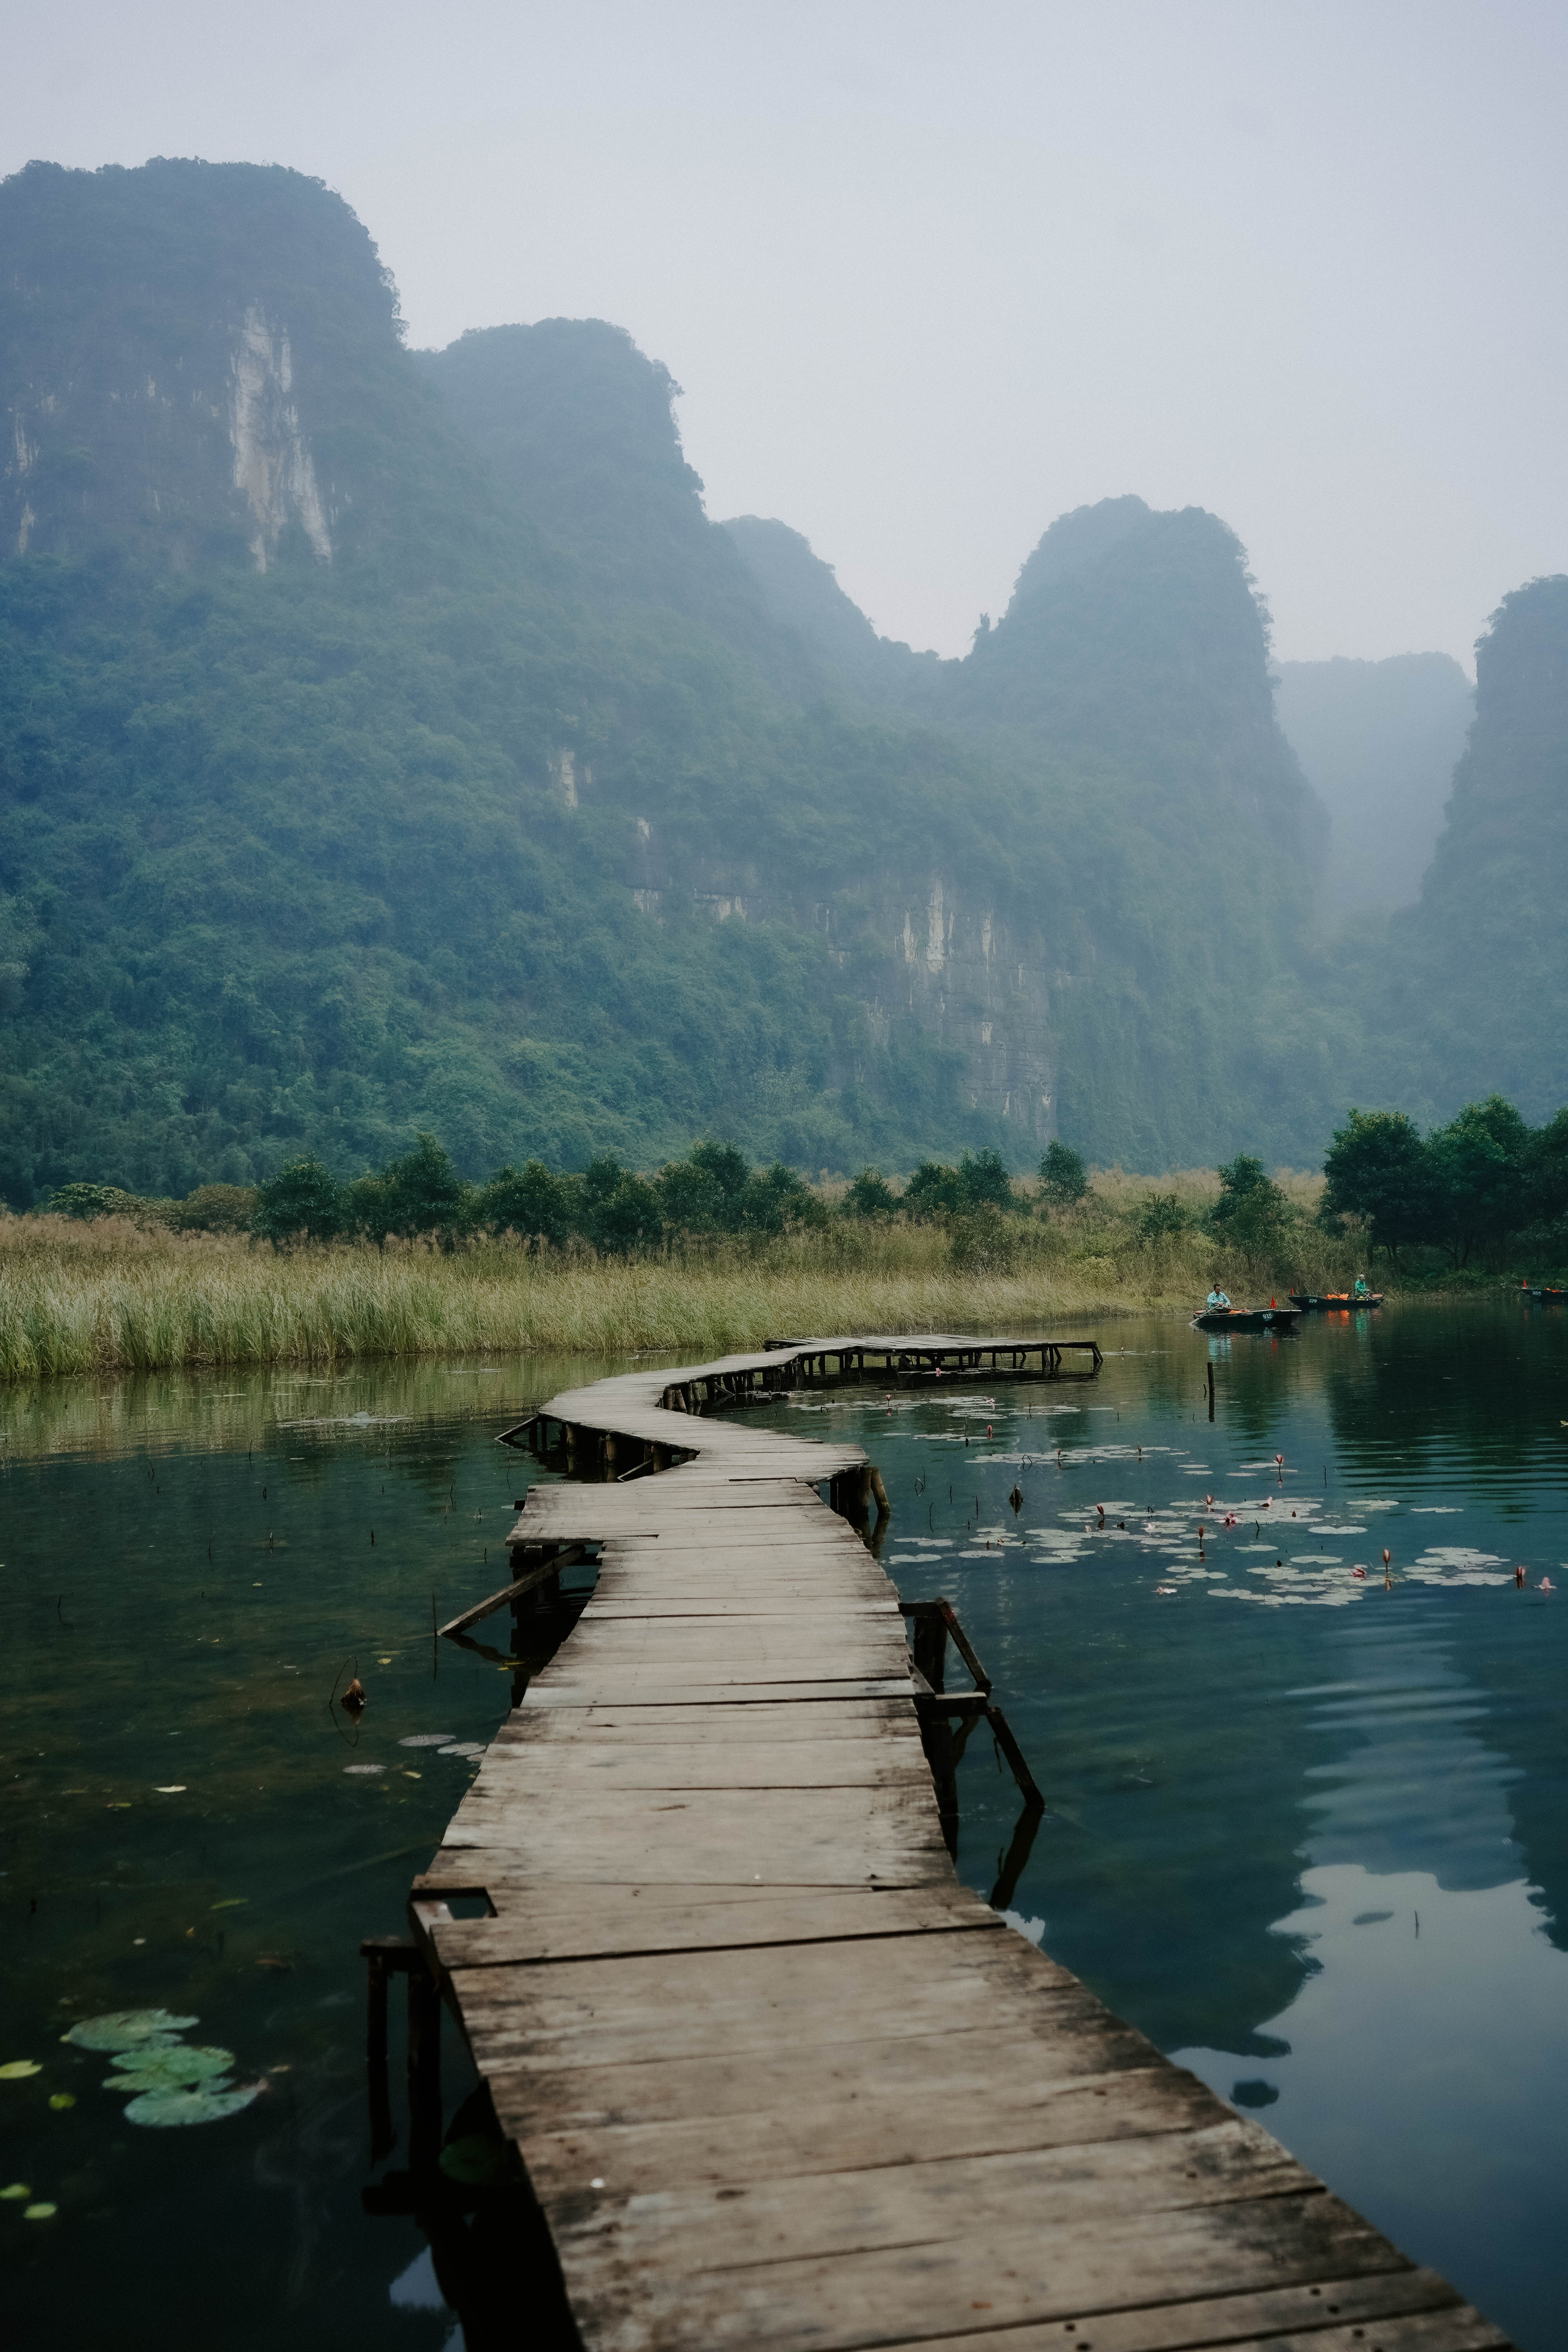 Wooden walkway surrounded by mountains and a lotus pond